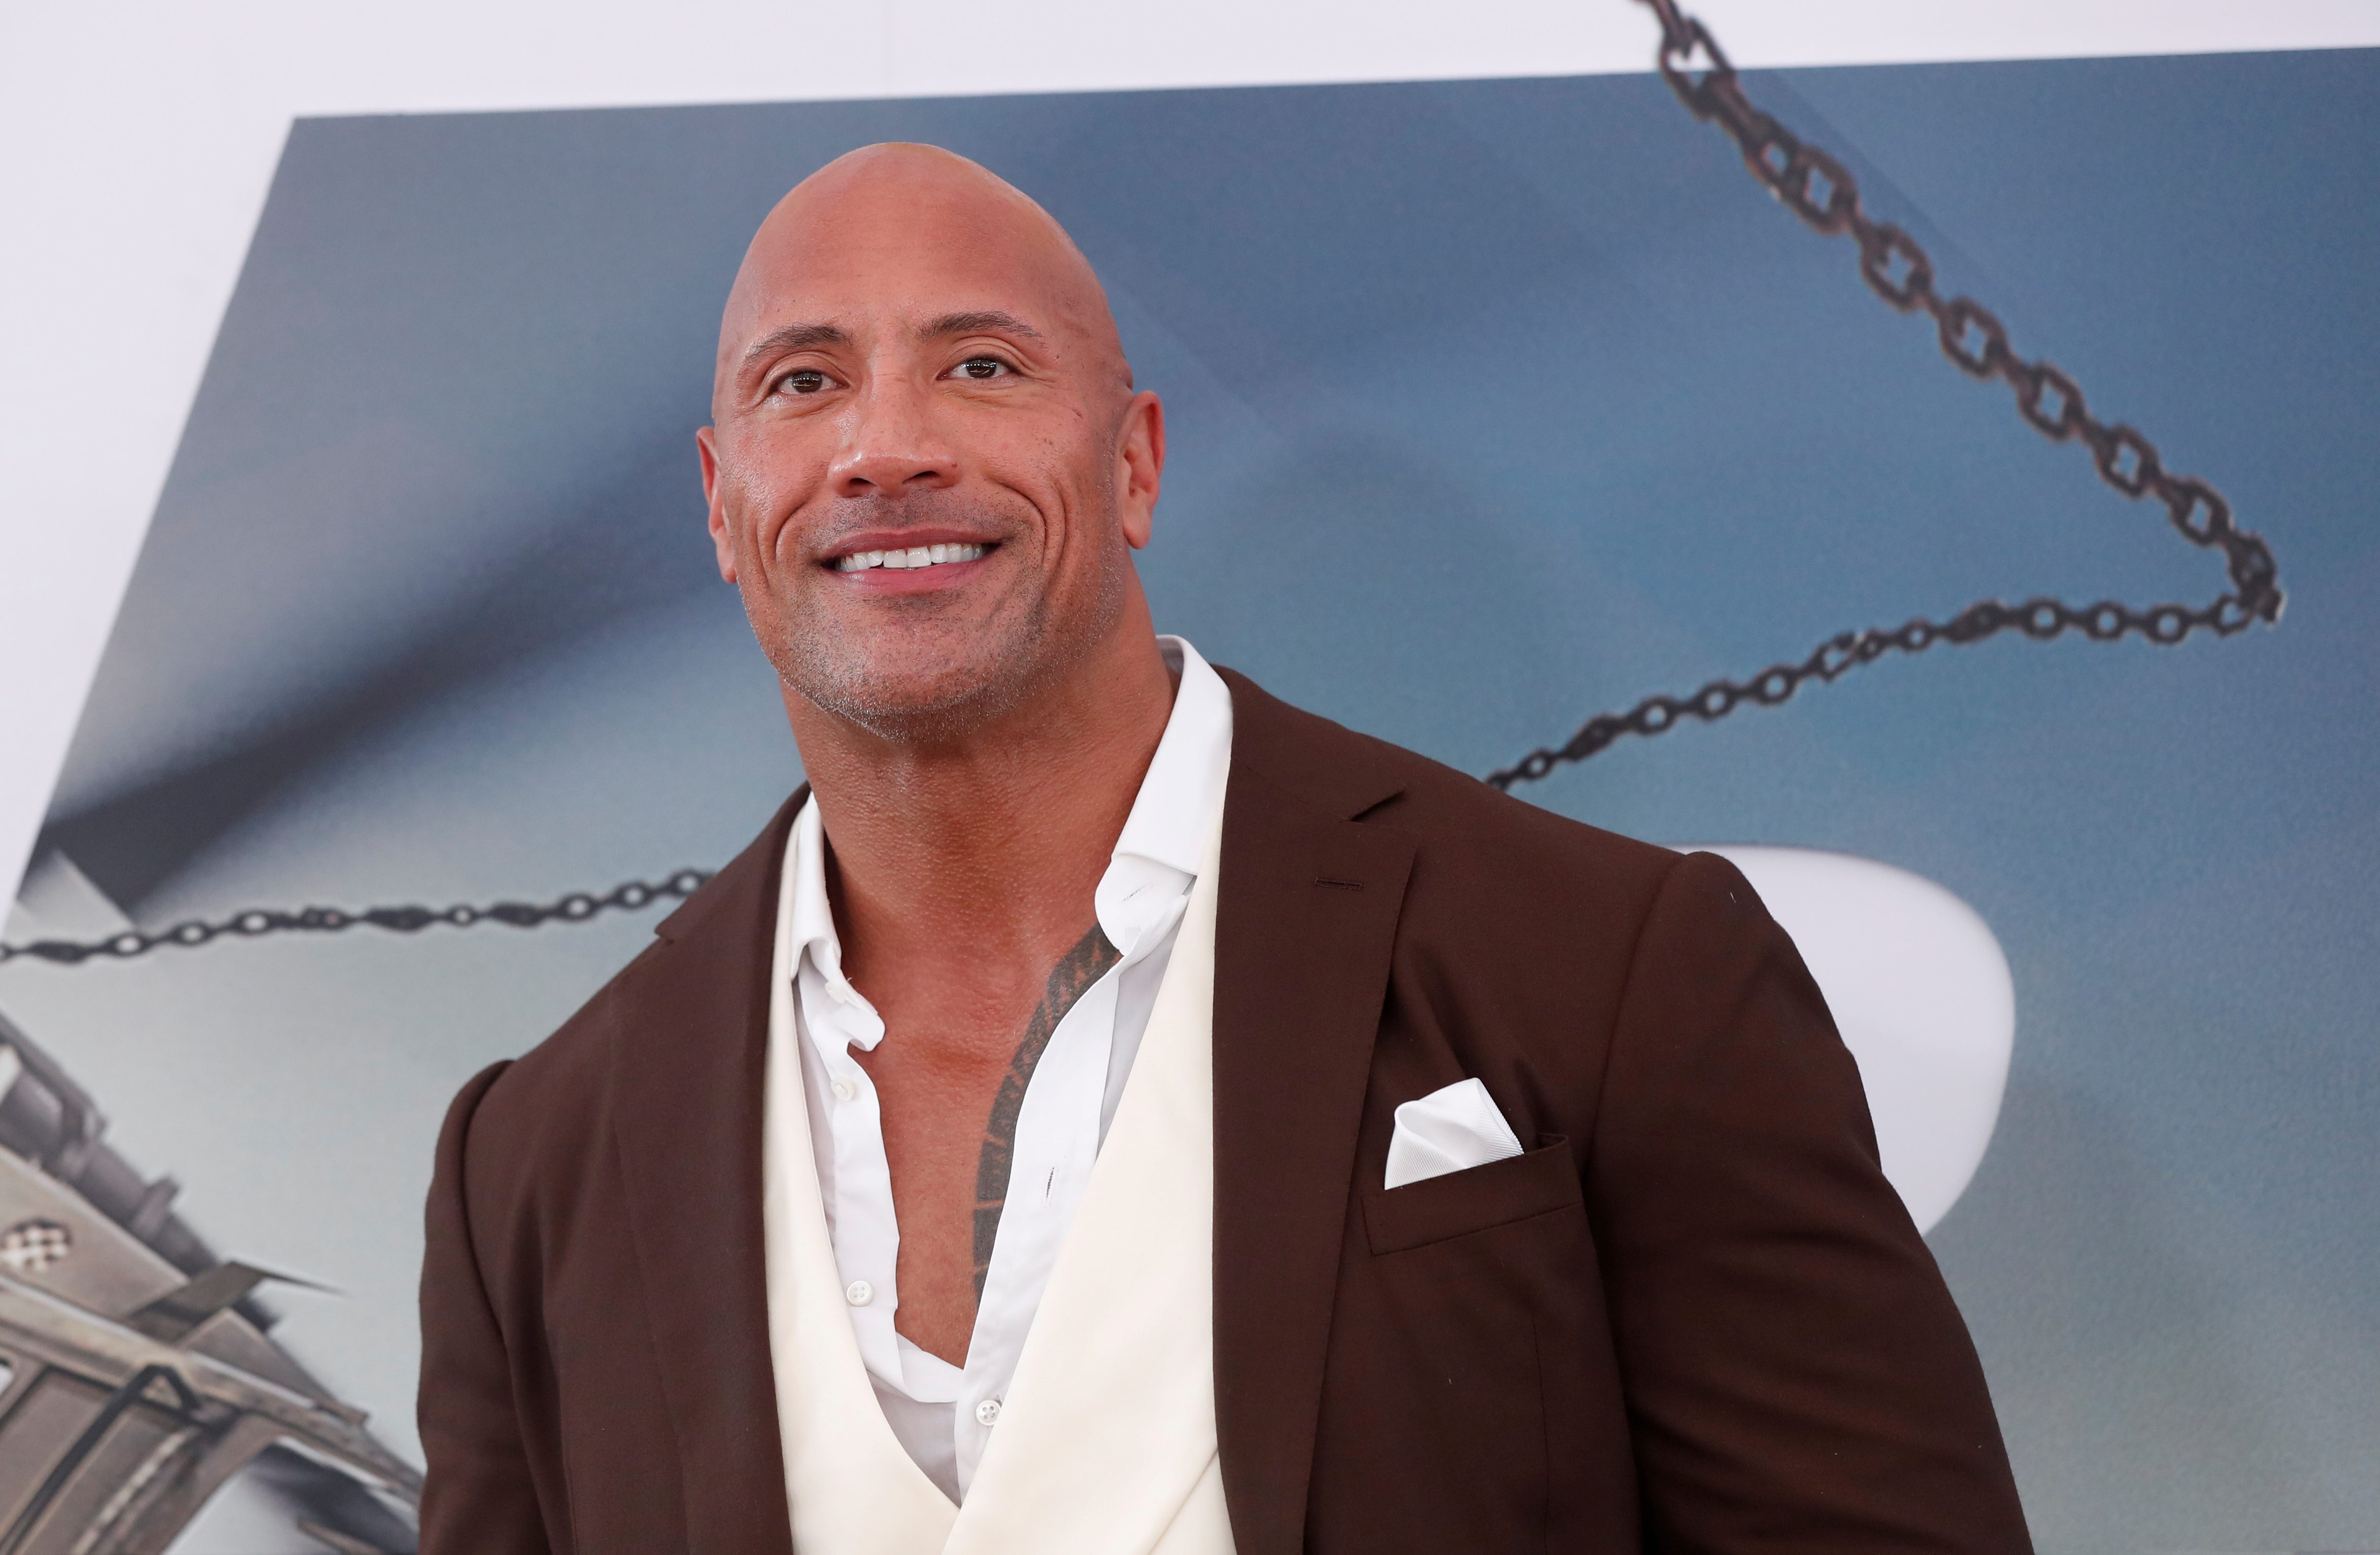 Dwayne Johnson would run for US President if people want him